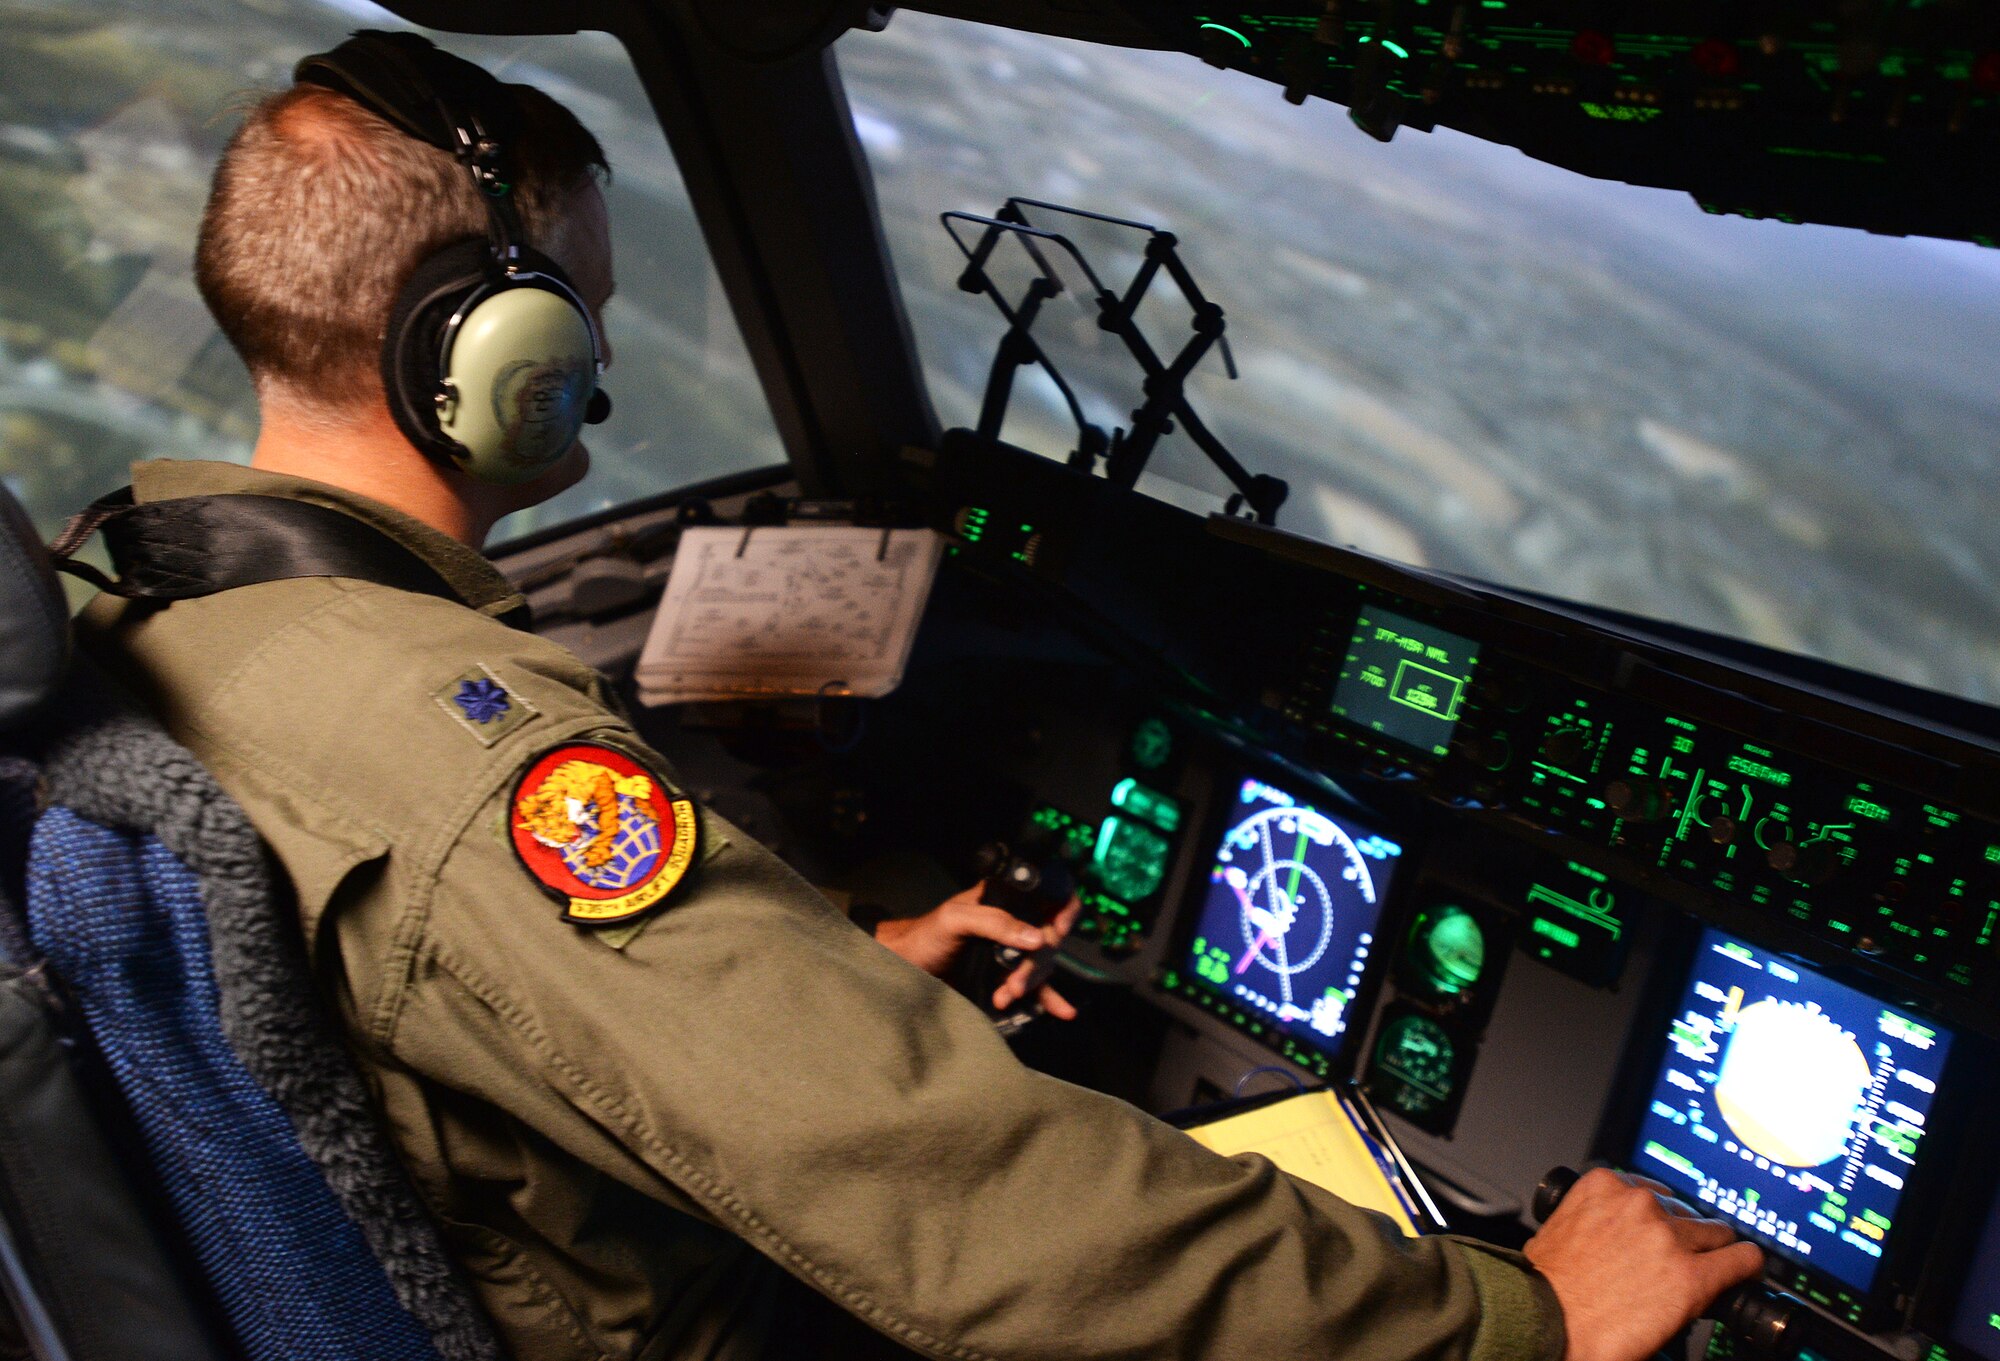 Lt. Col. Gregg Johnson, 535th Airlift Squadron commander, banks left in a C-17 Globemaster III simulator during a quarterly training session at Joint Base Pearl Harbor-Hickam, Hawaii, Feb. 18, 2014. Johnson is a C-17 pilot, and trains extensively using the simulator, designed to give pilots a realistic feel for in-air tactical and emergency operations. (U.S. Air Force photo/Staff Sgt. Alexander Martinez)